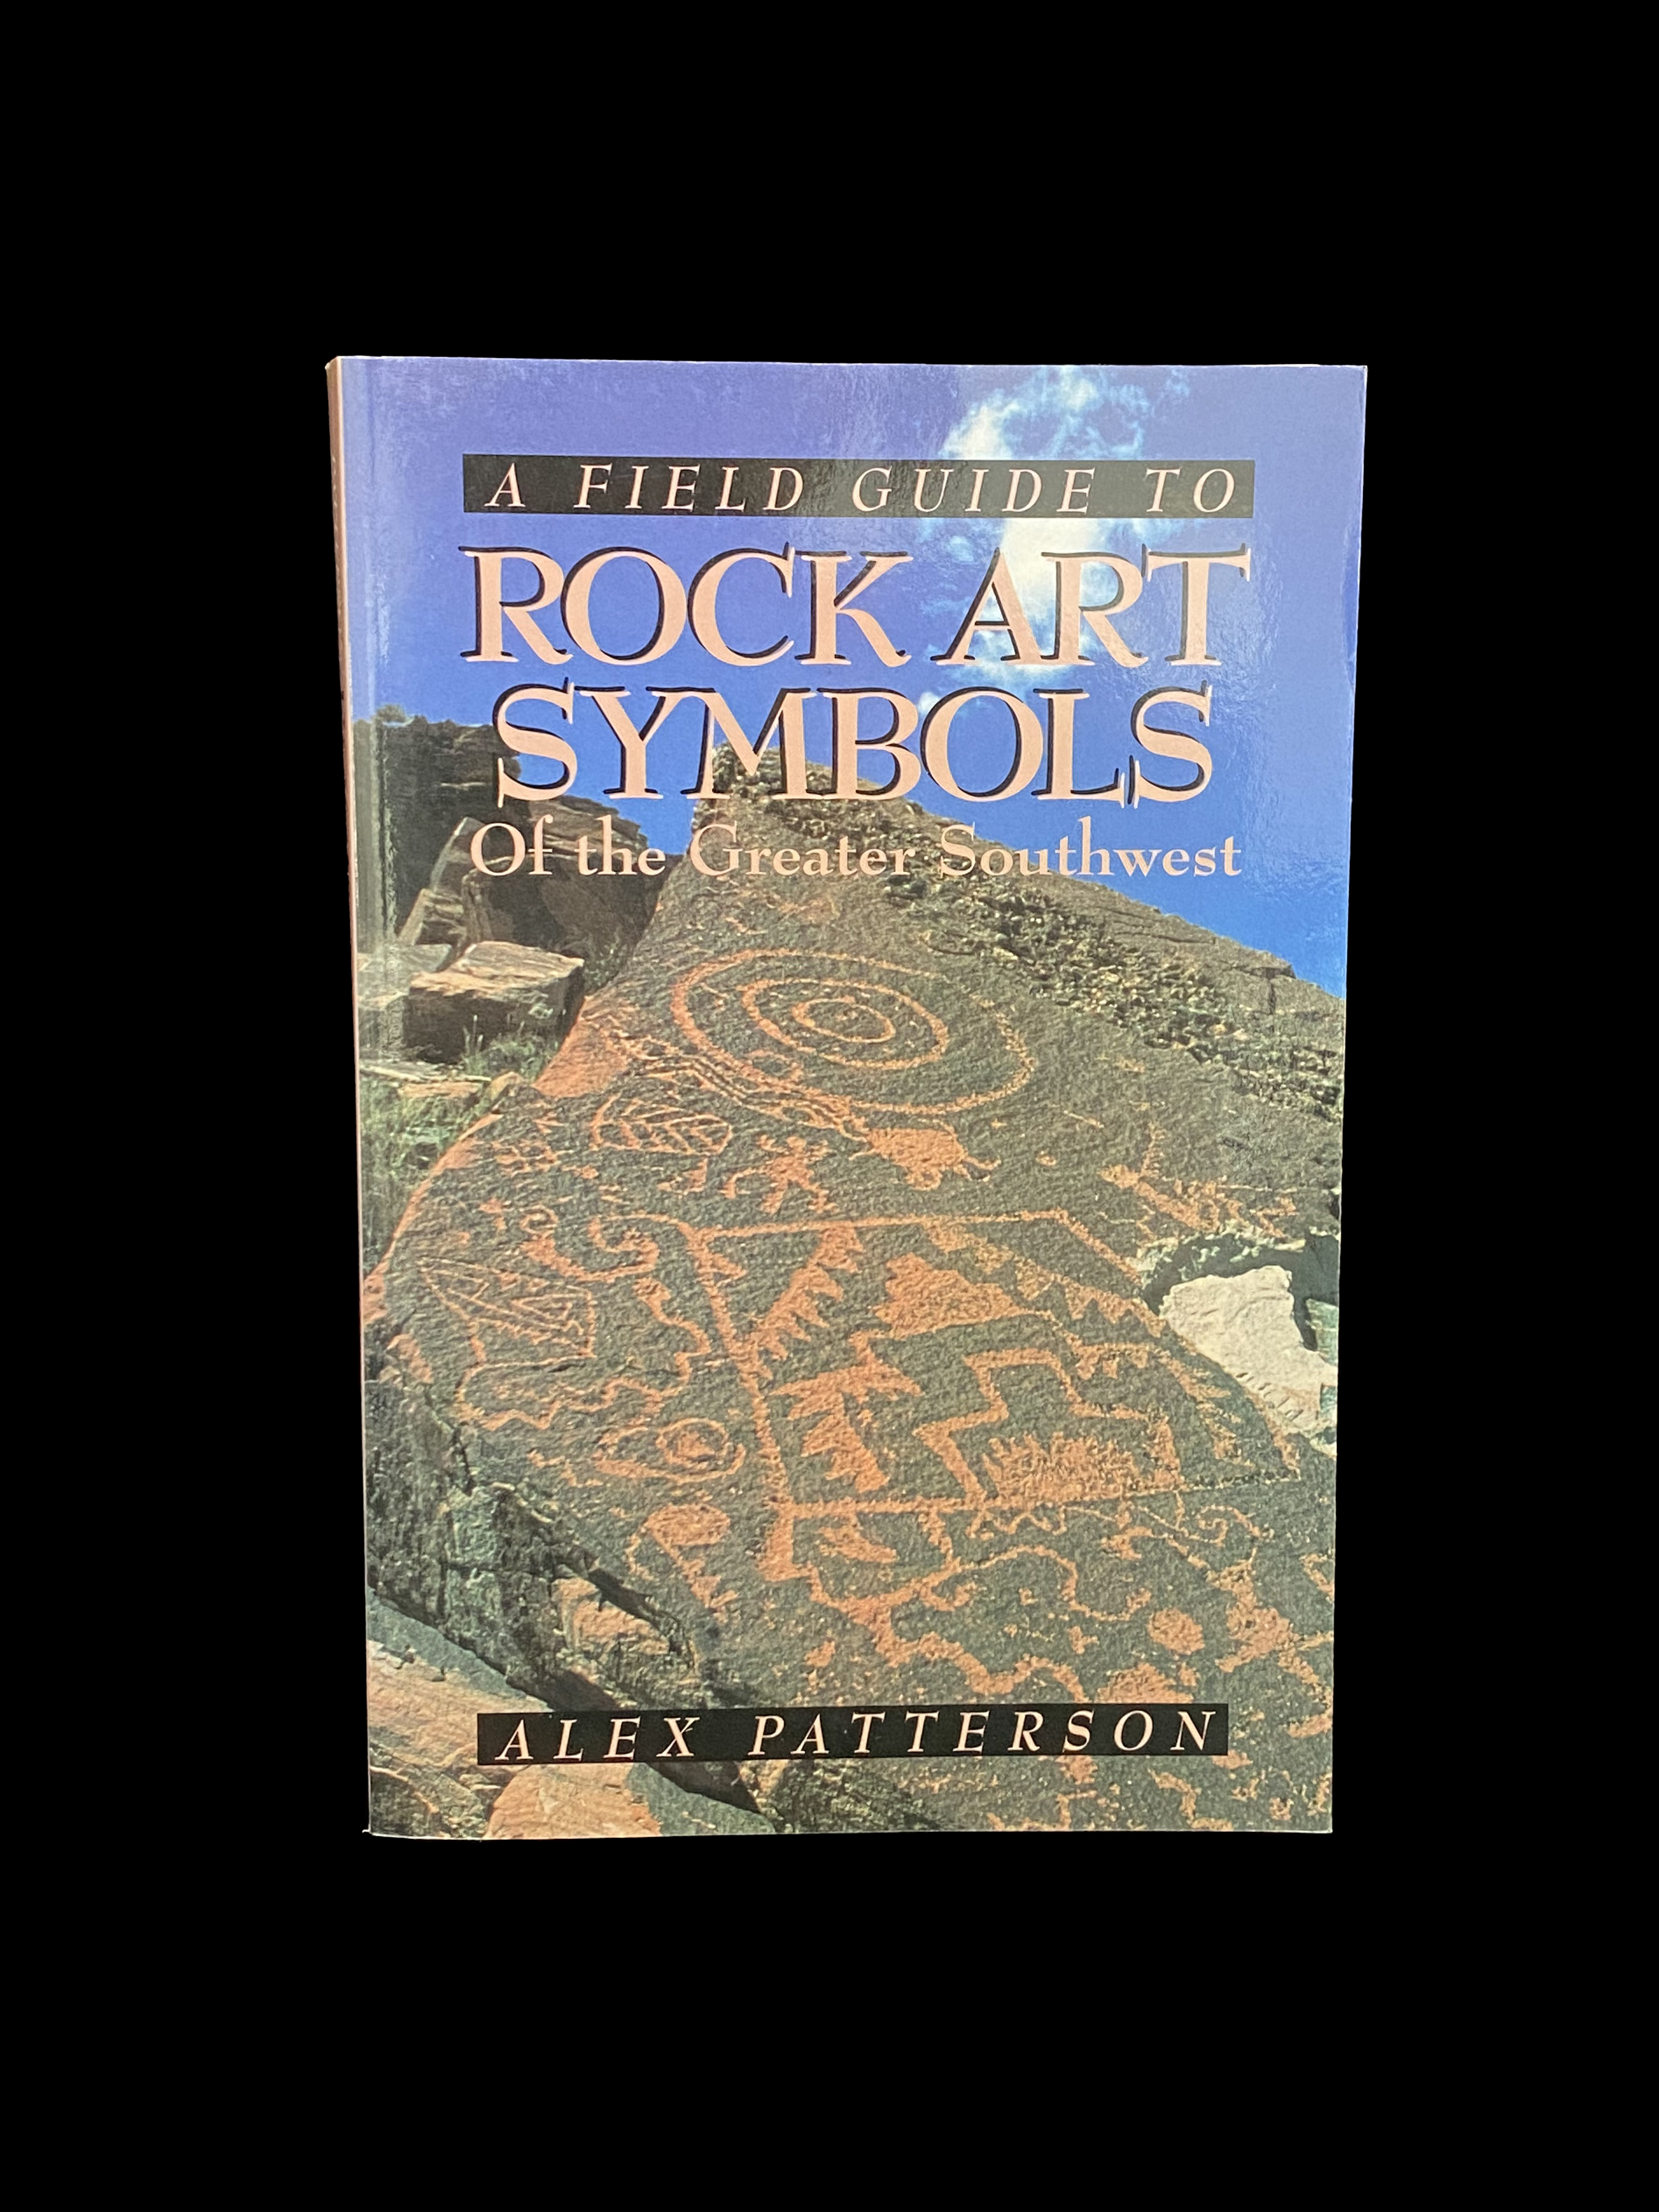 A Field Guide to Rock Art Symbols of the greater Southwest by Alex Patterson